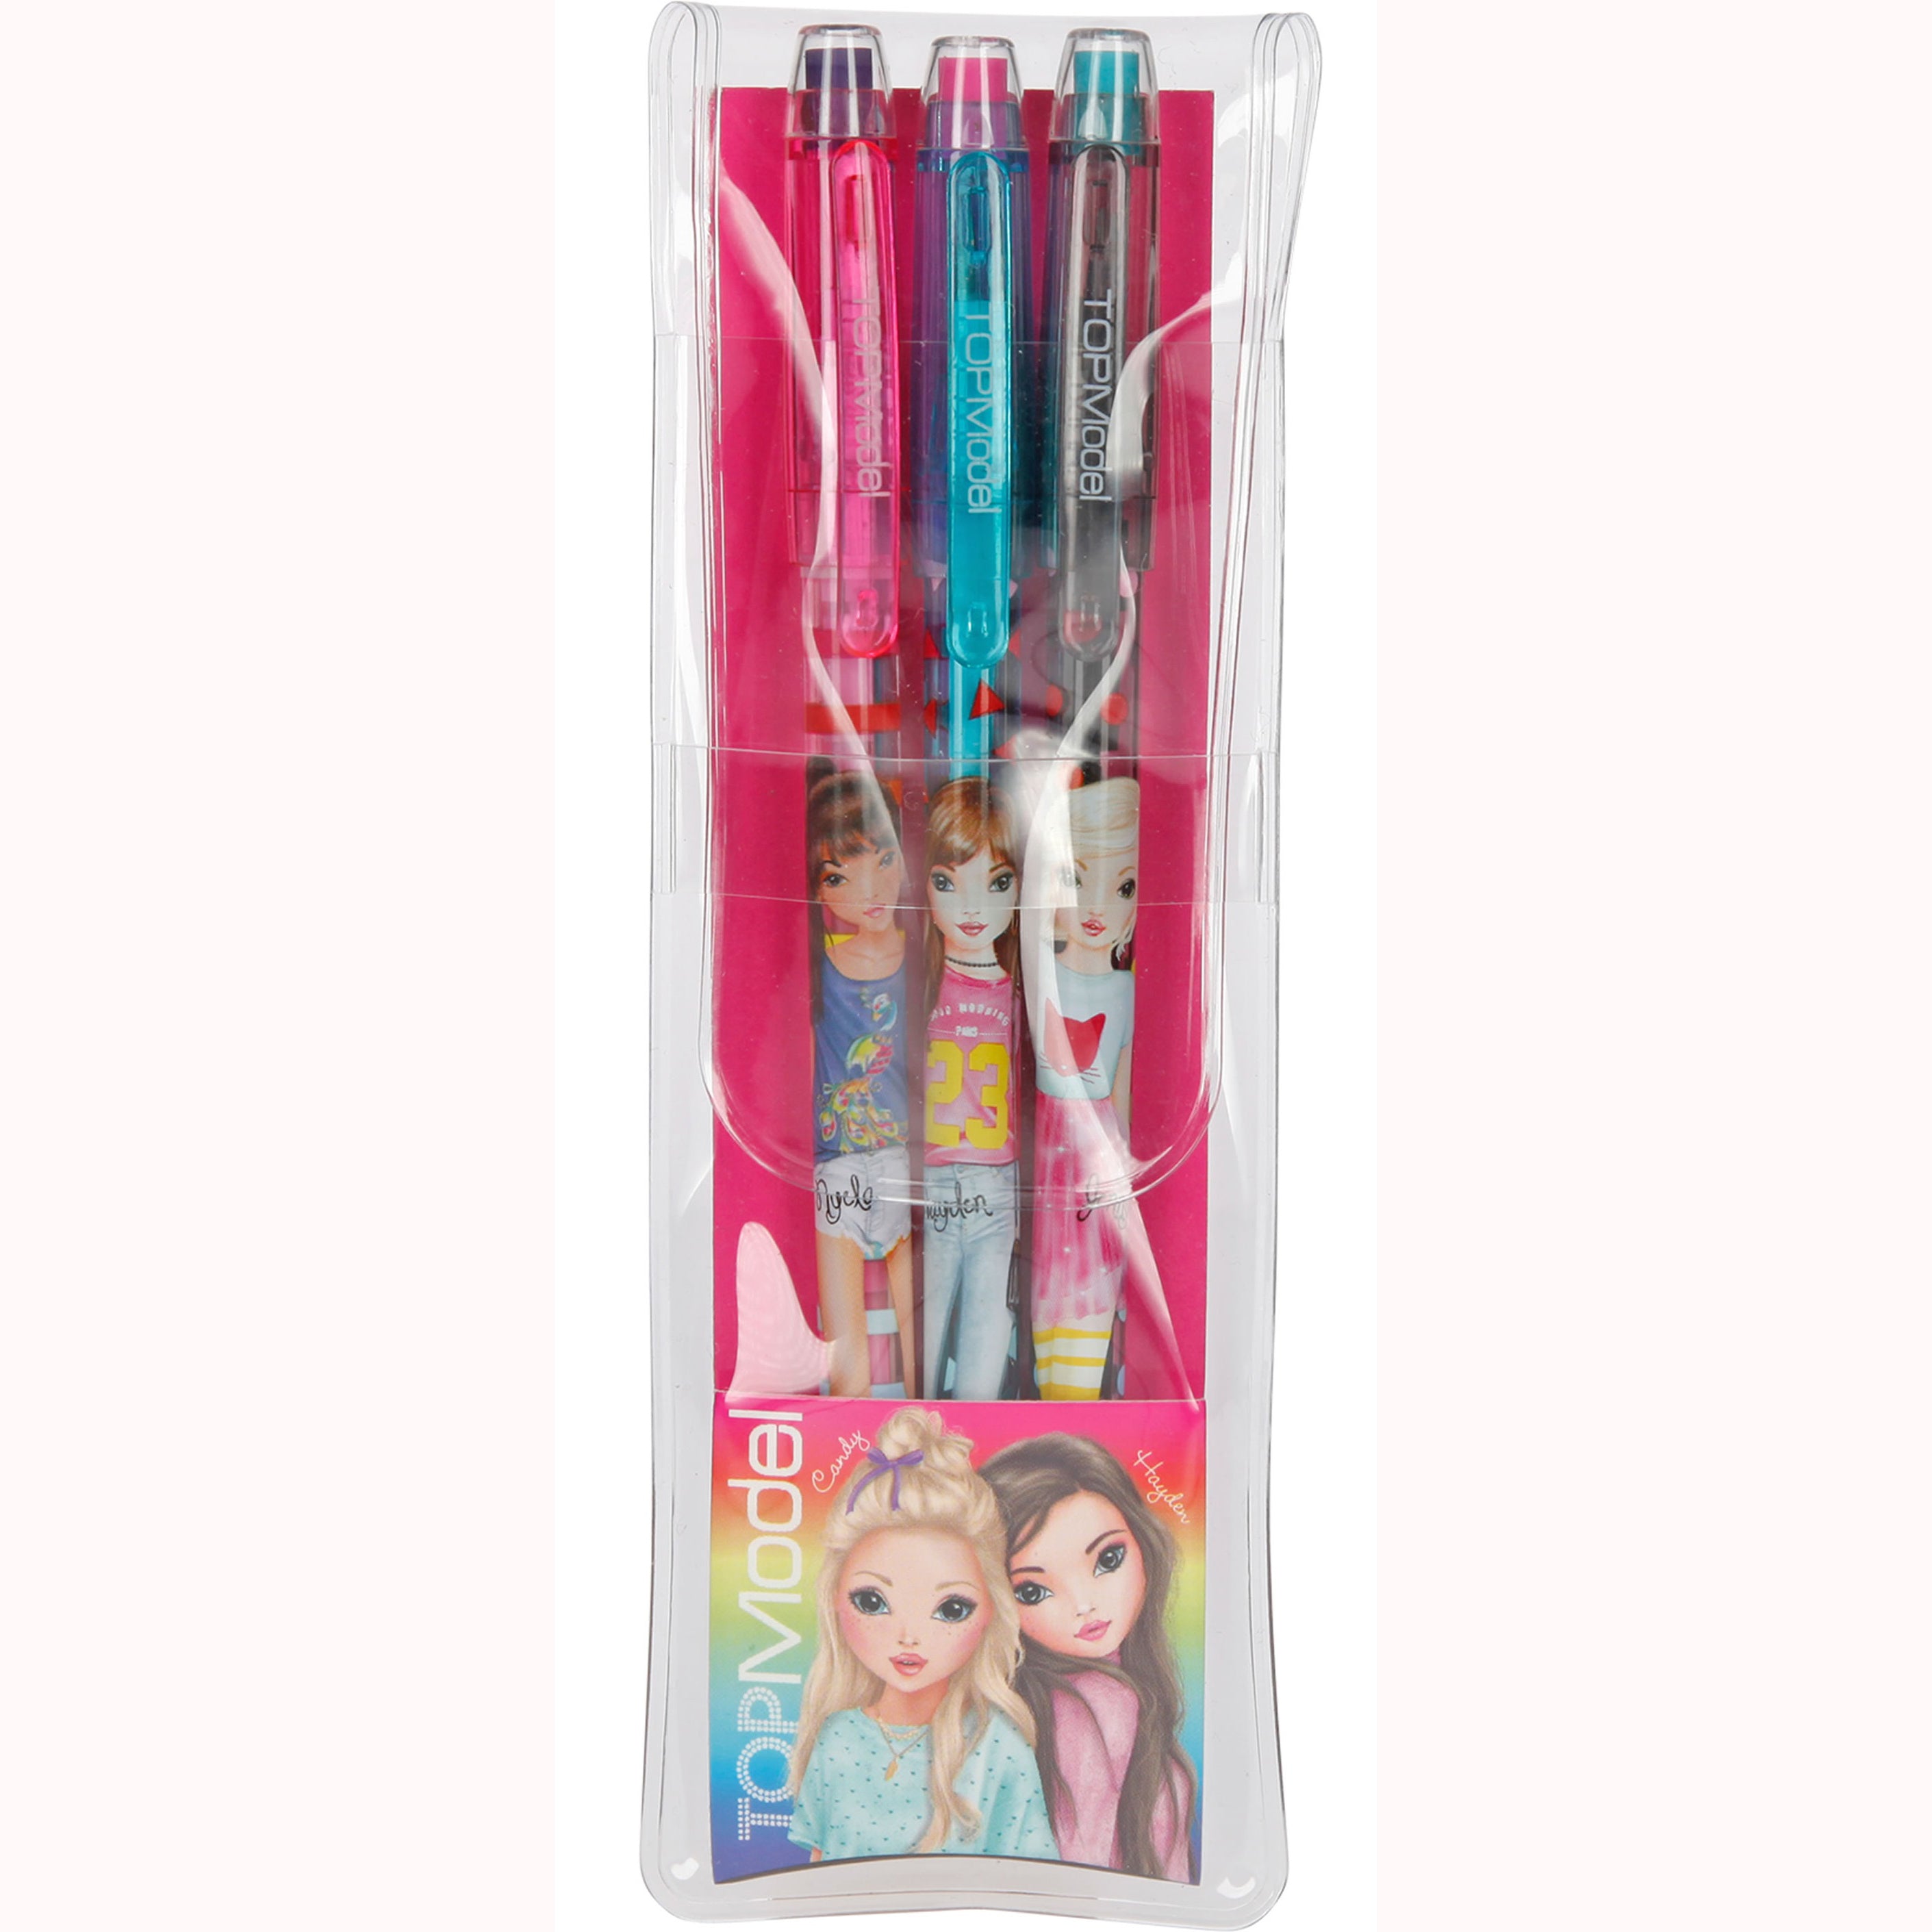 Push Pencils with Eraser by Depesche (Set of 3) in packaging 